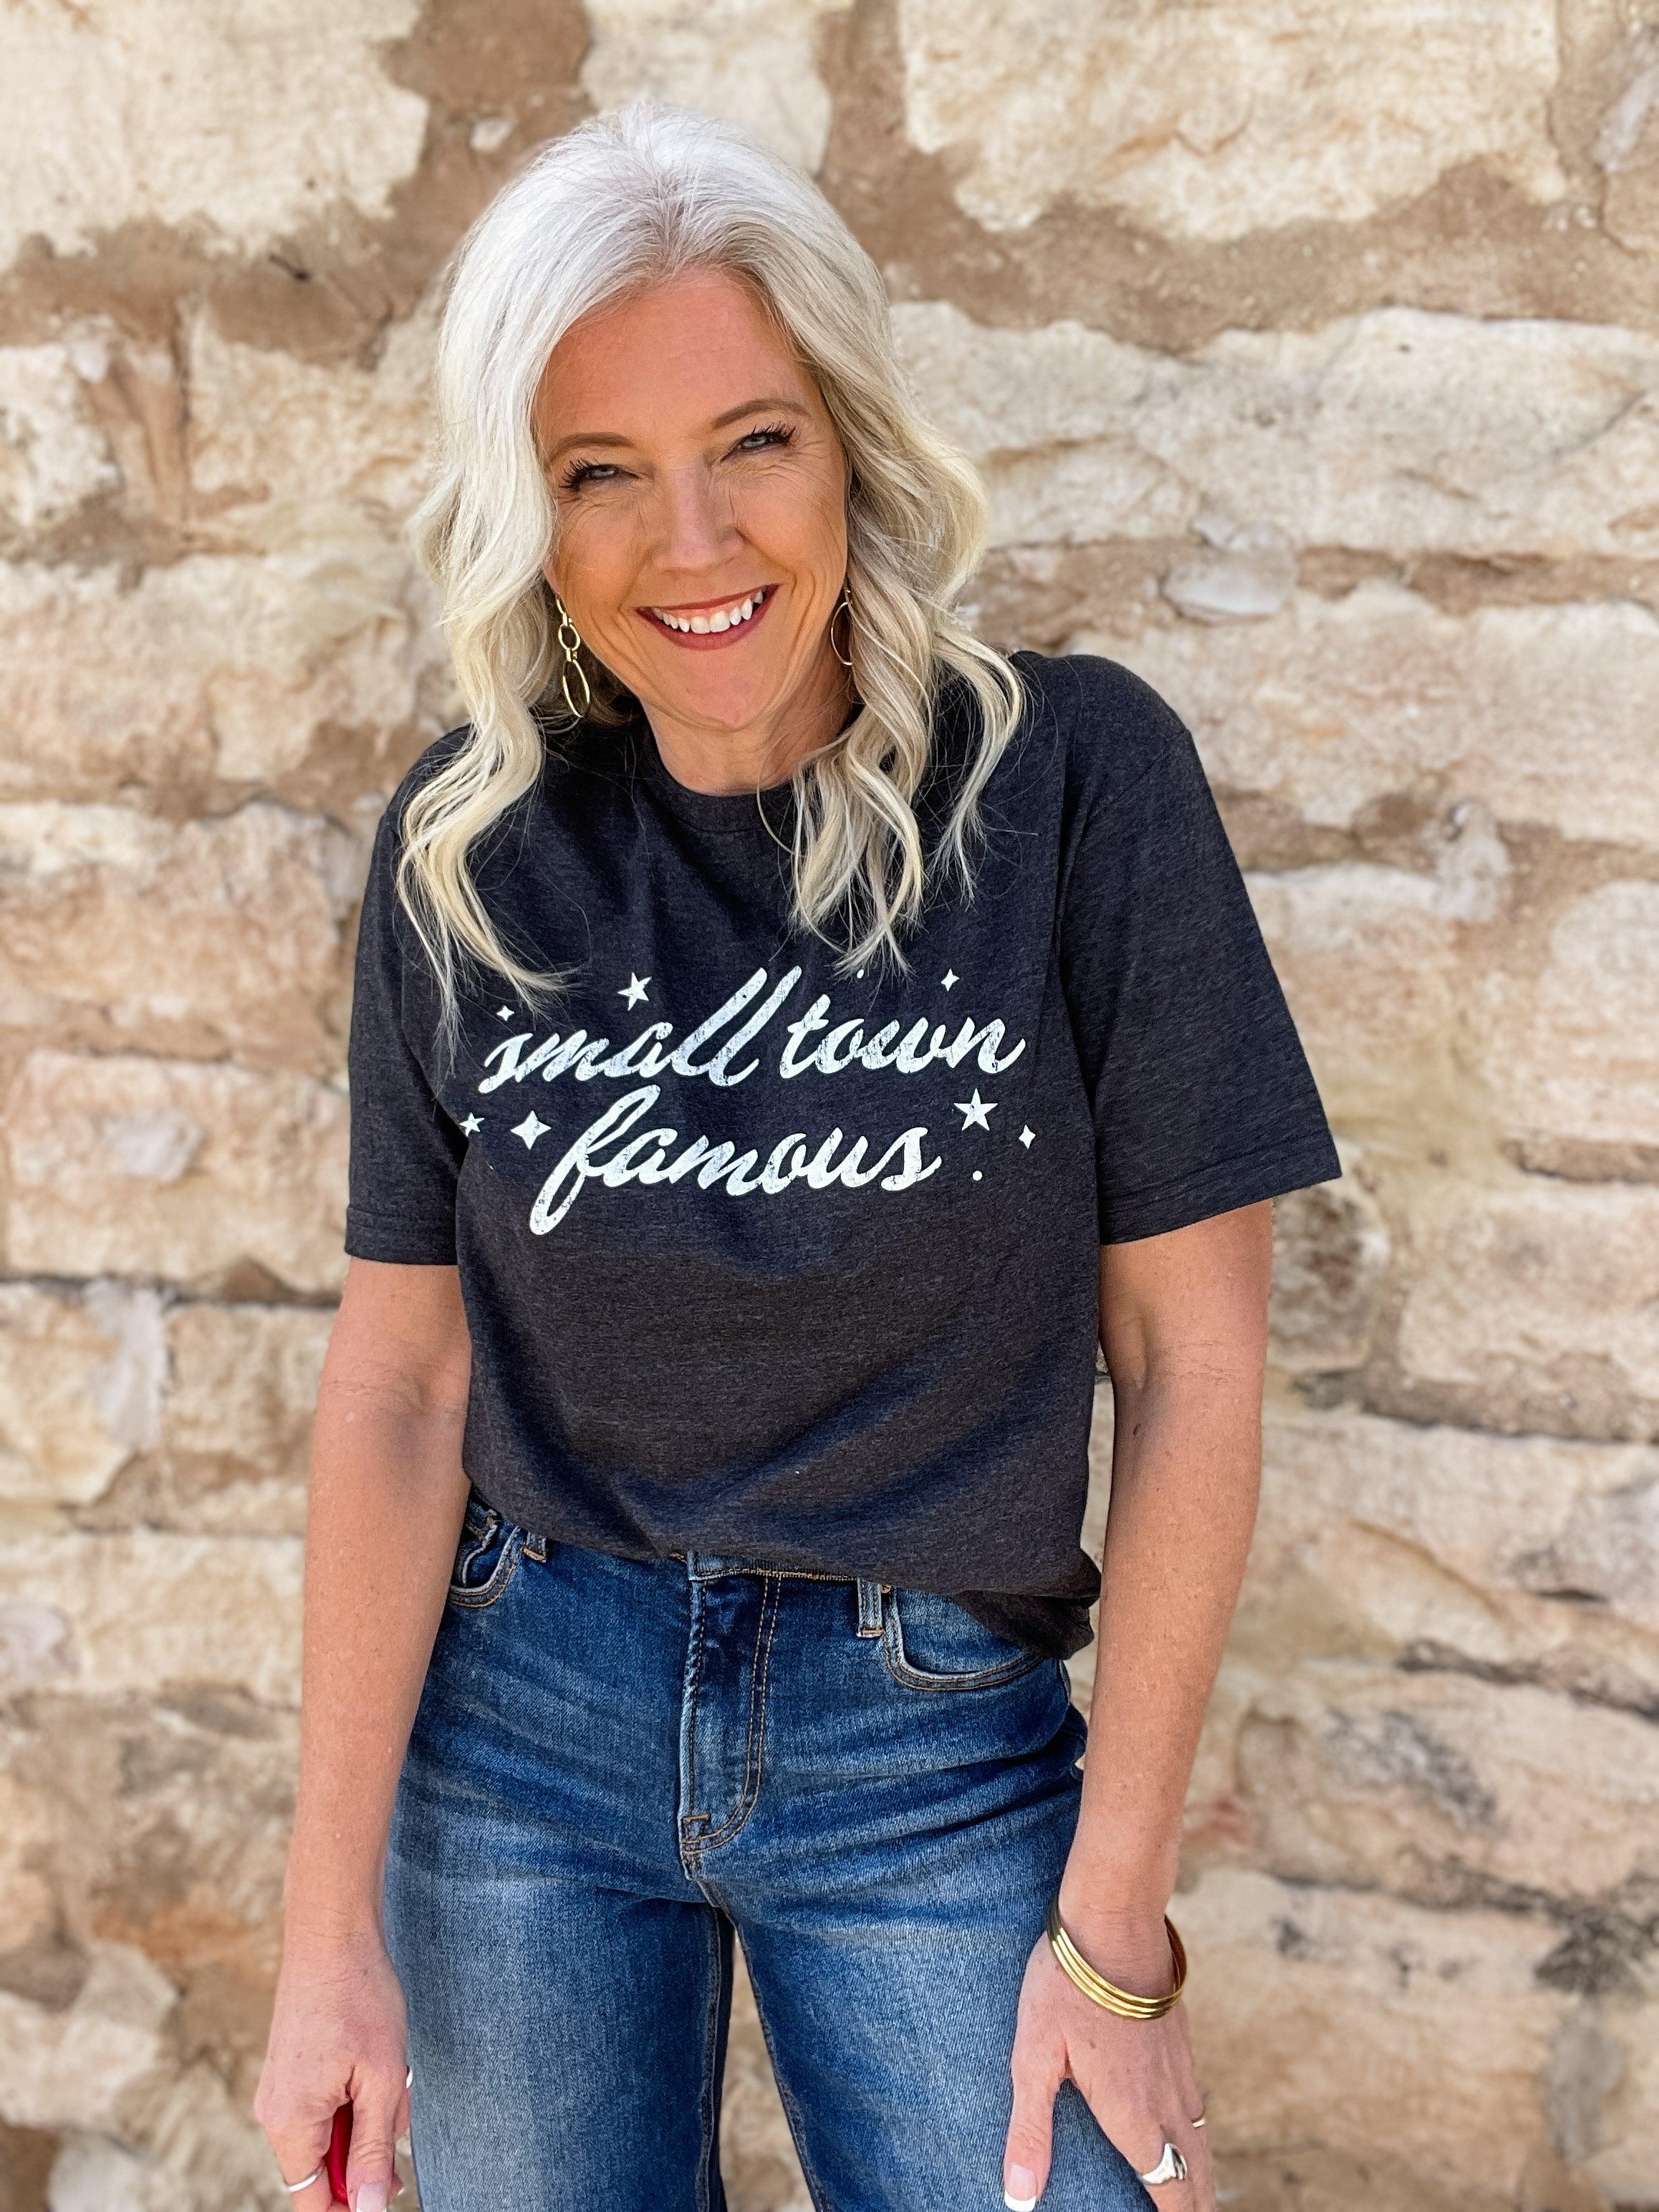 Small Town Famous Tee